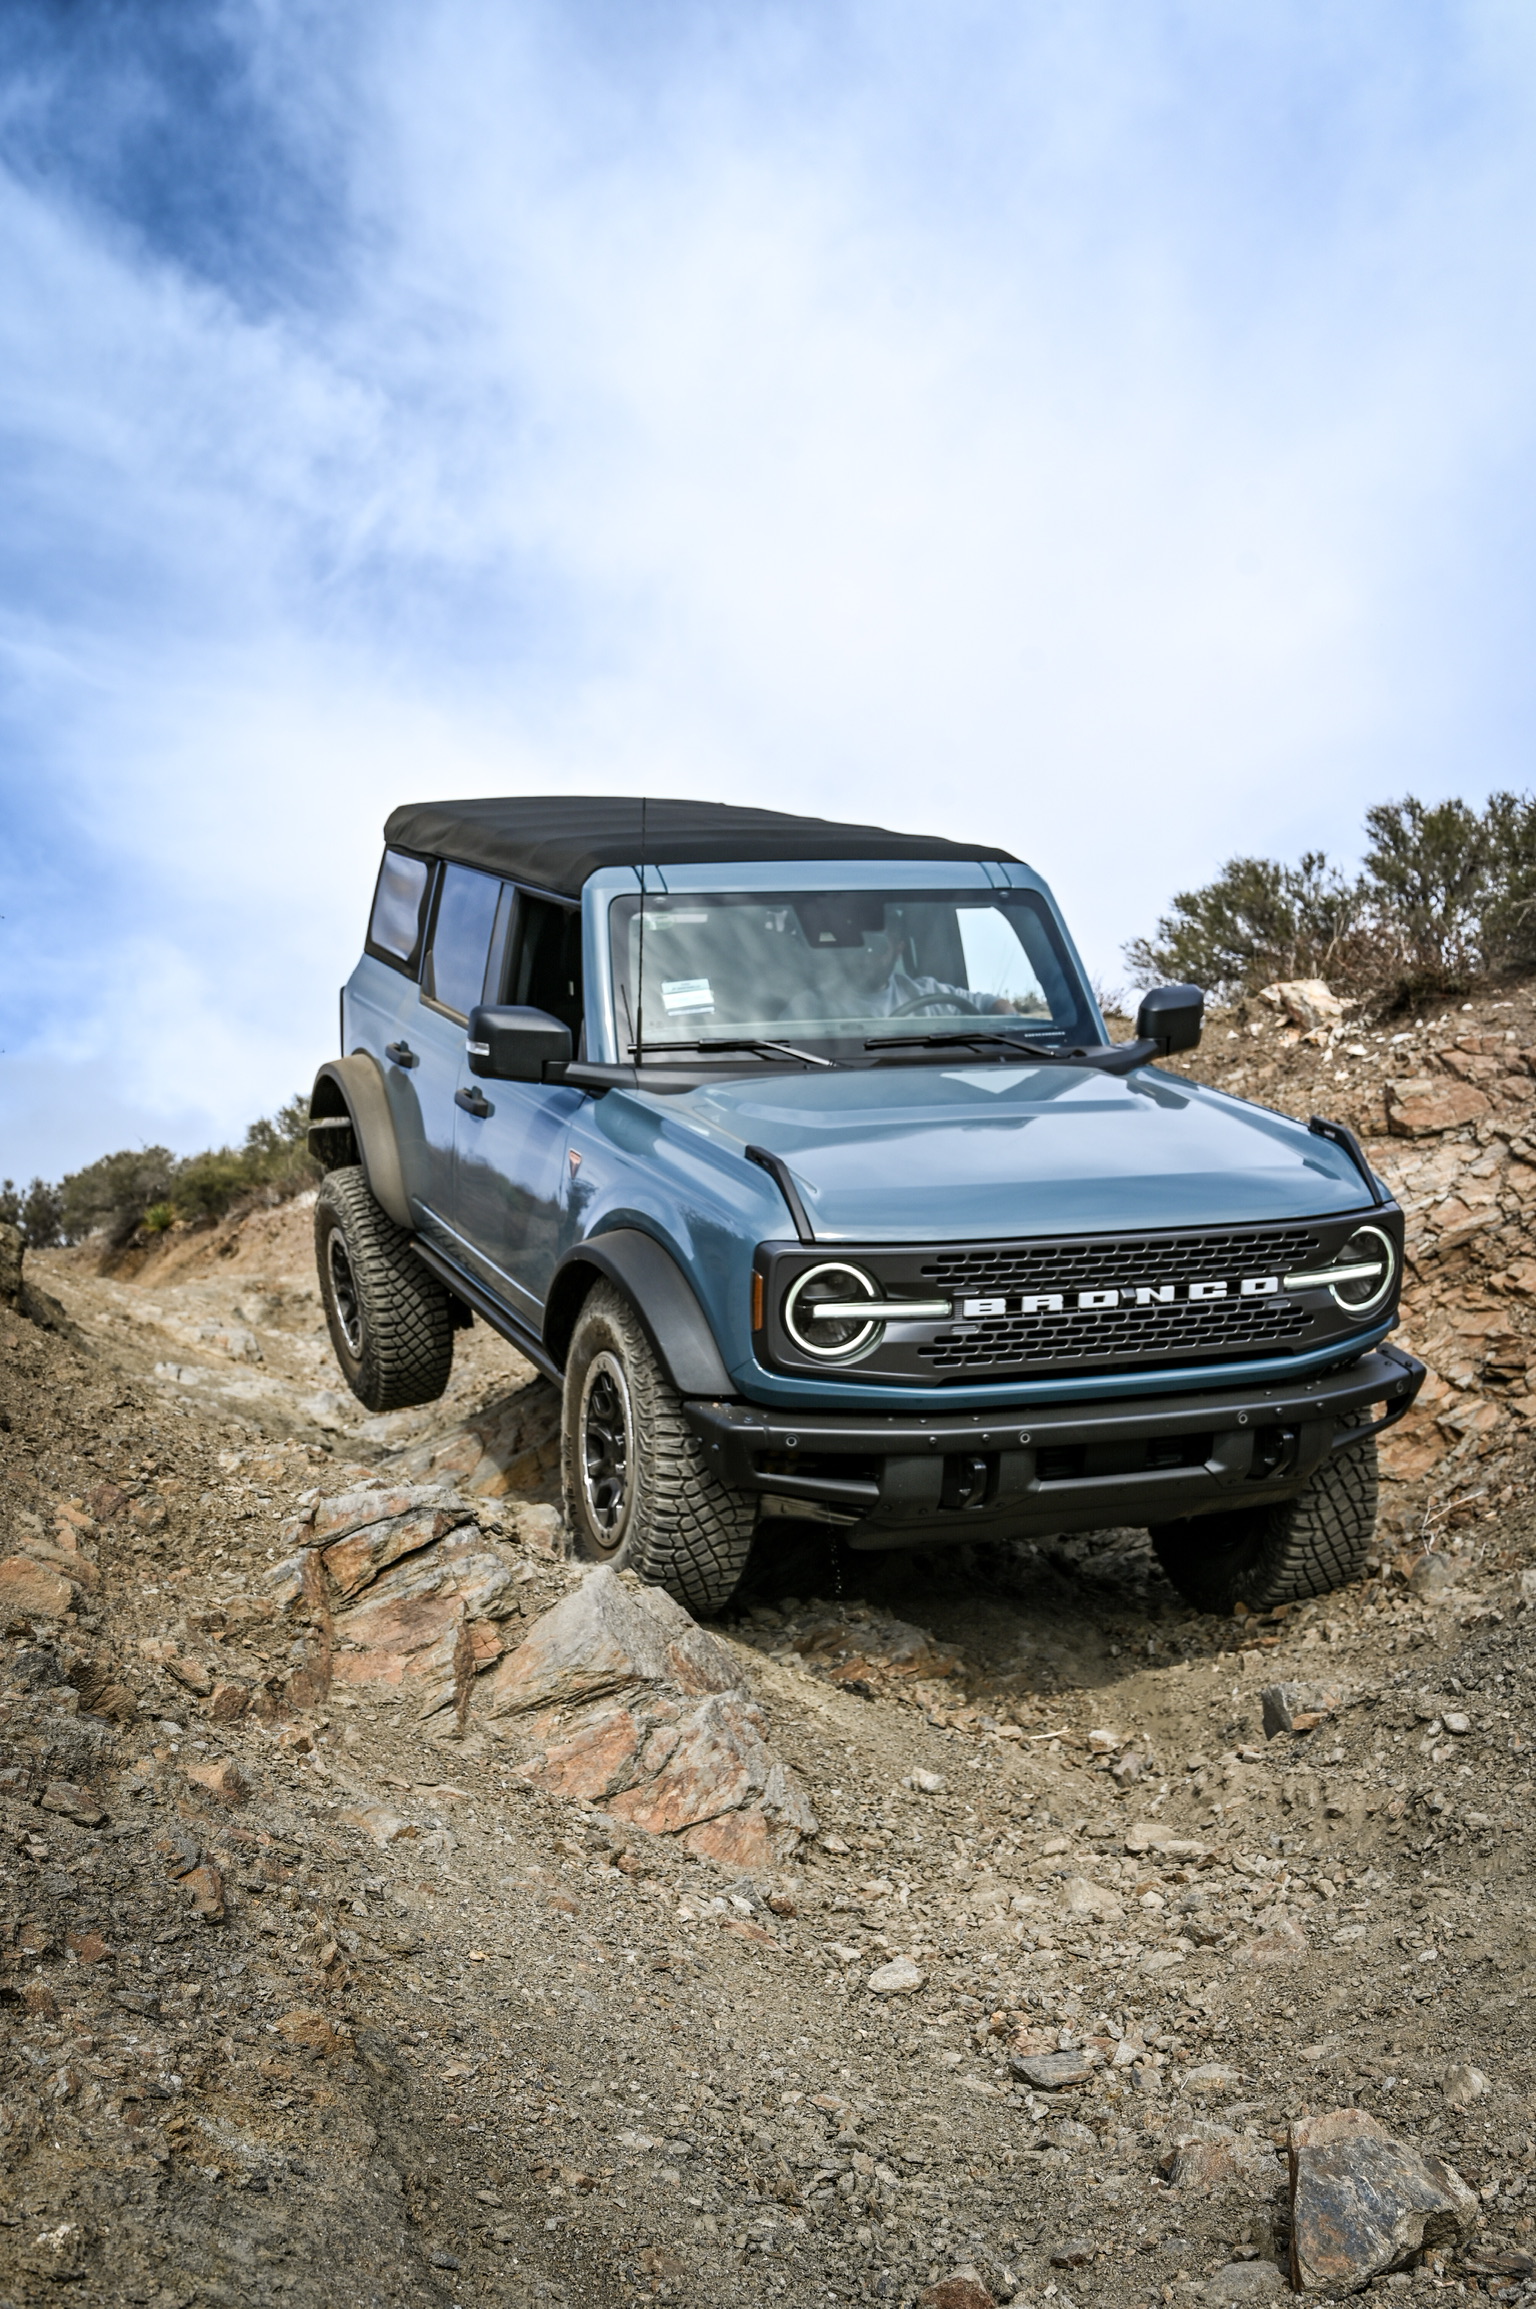 Ford Bronco 2.7l Area51 badlands first time on a trail 5A4F43CF-C4A9-48ED-9DB2-77DCF5773A11